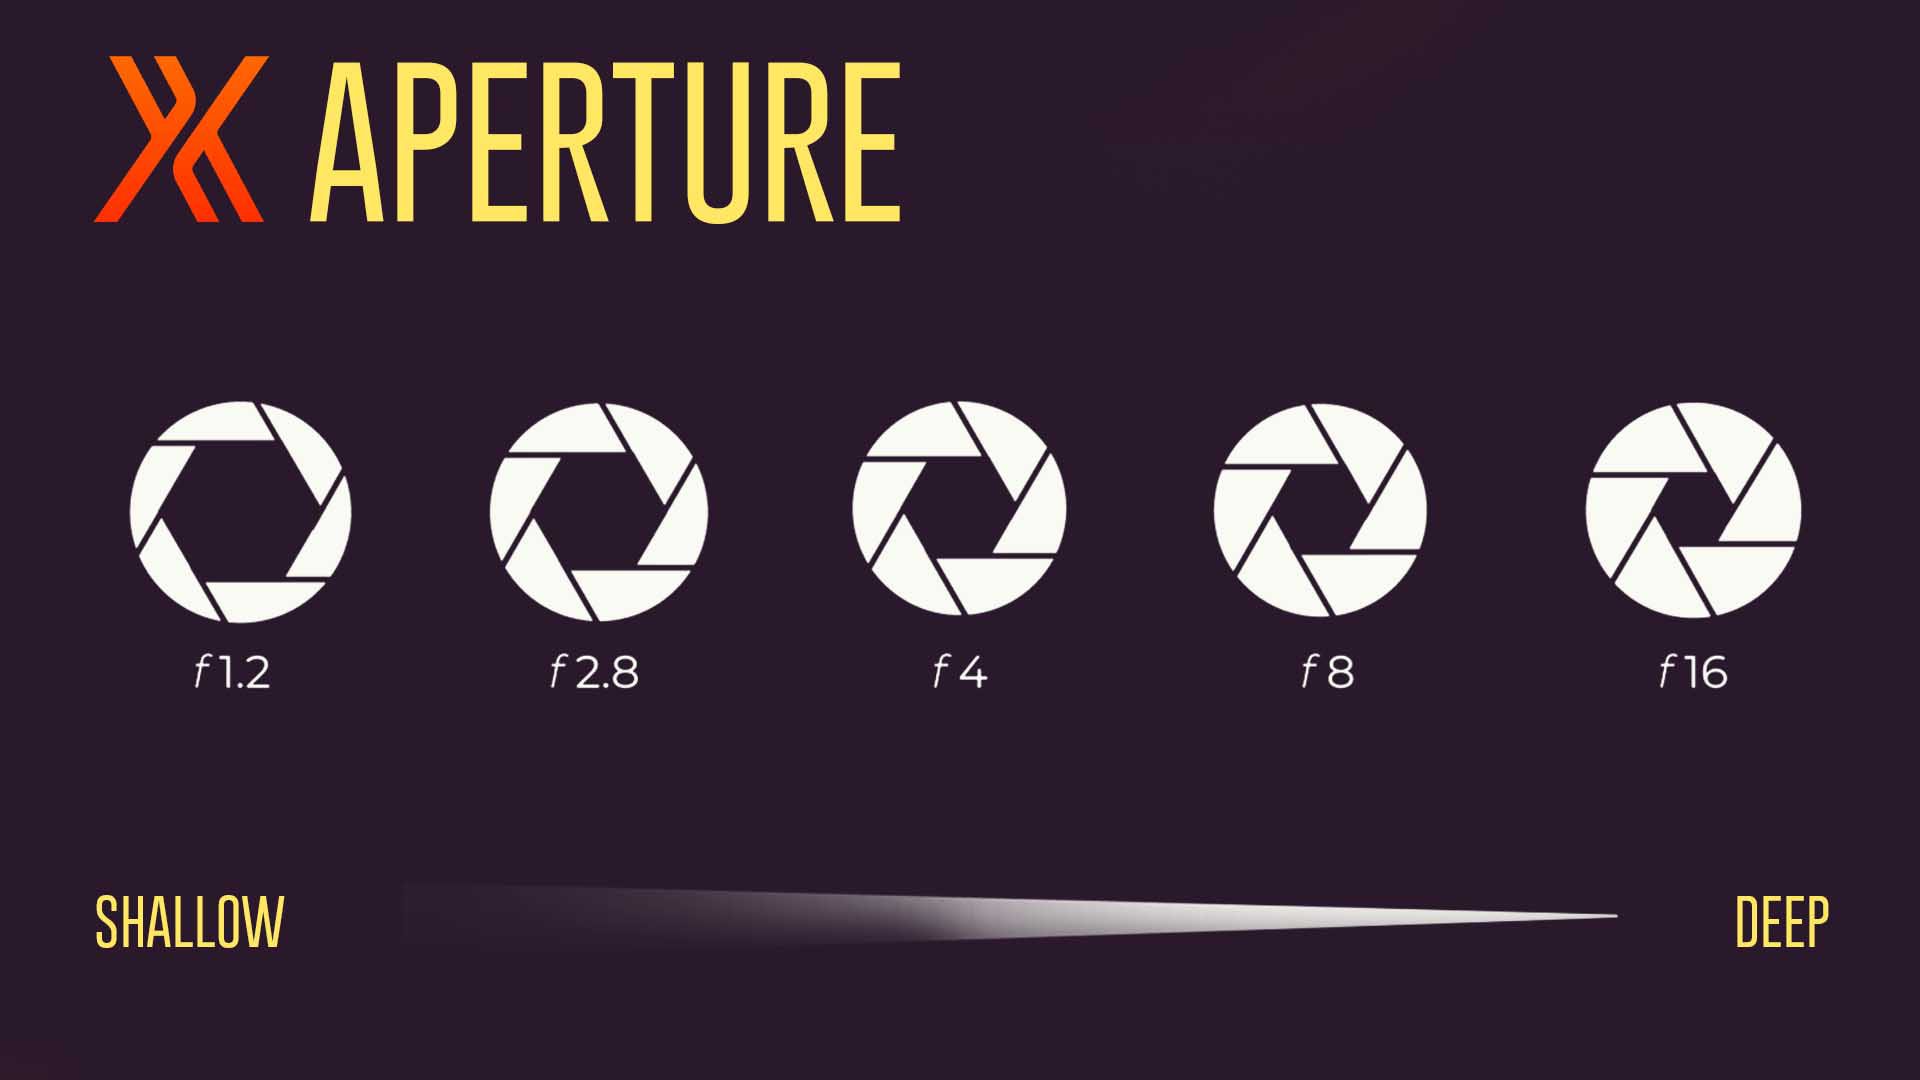 What is aperture infographic